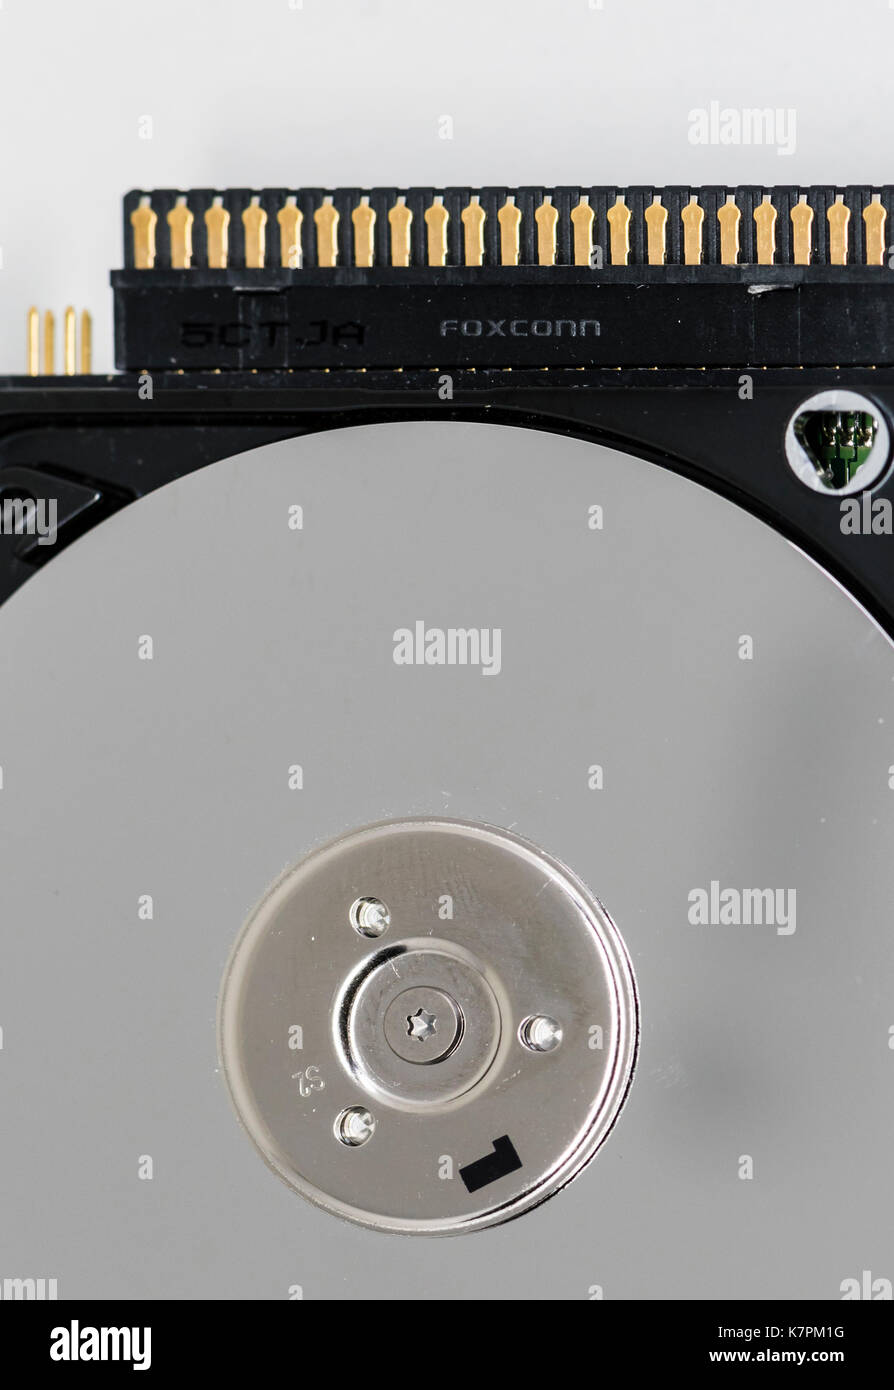 Close-up of an opened computer hard drive disk with the Foxconn company logo imprinted on the case. Stock Photo